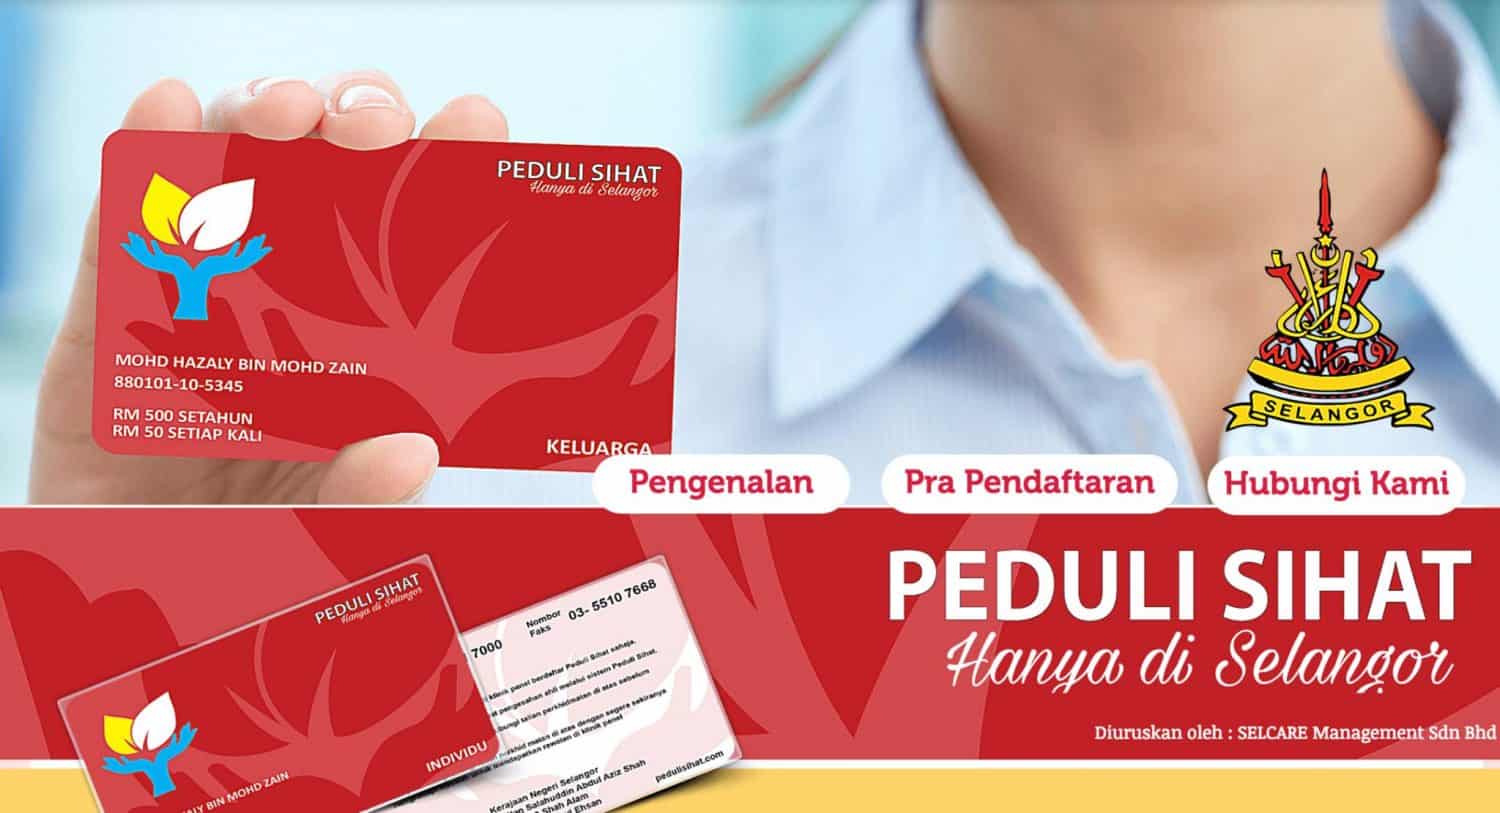 Selangor Government Medical Card The State Government Adheres To And Is Created By Both The Malaysian Federal Constitution The Supreme Law Of Malaysia And The Constitution Of The State Of Selangor